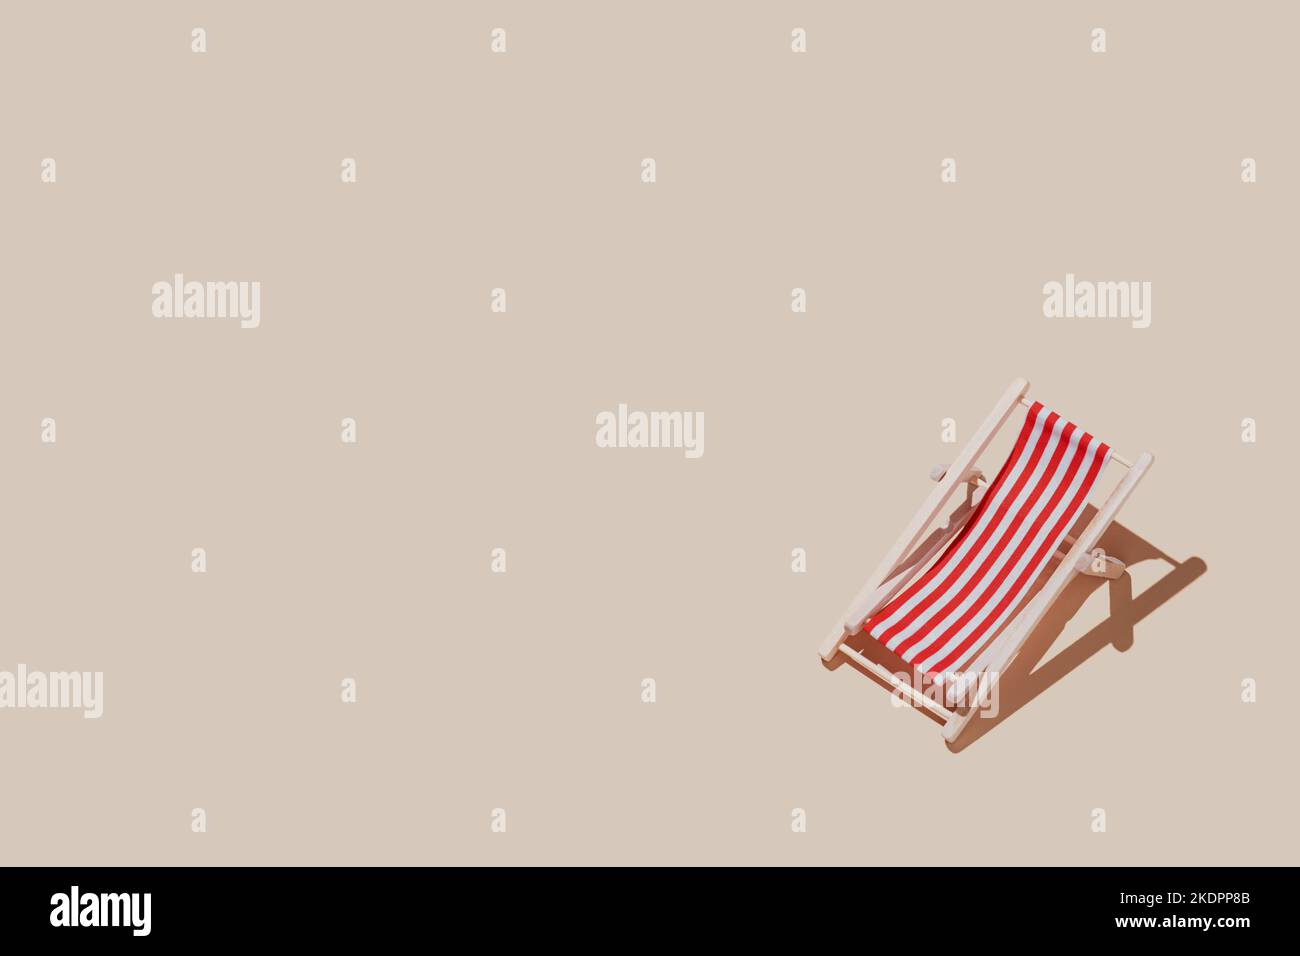 Vacation, beach, travel or relaxation concept. Beige background flat lay as symbol of sand with mini sun lounger for beach chair. Minimalism with copy space area for text, wooden red-white lounge Stock Photo